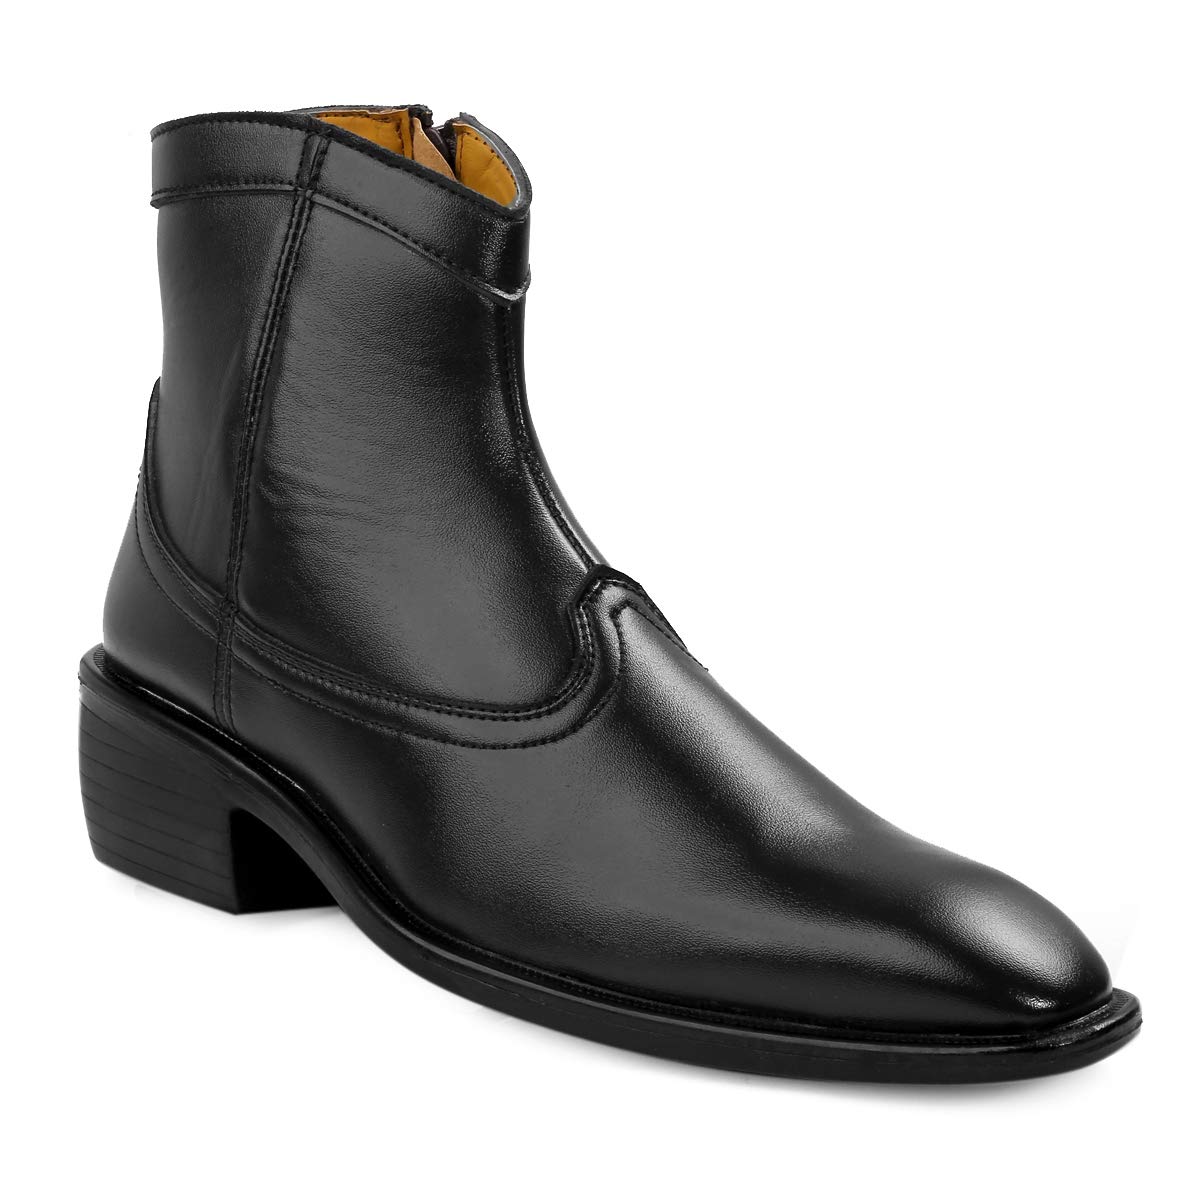 Classy High Ankle Black Casual And Formal Boot With Zip Pattern-JonasParamount